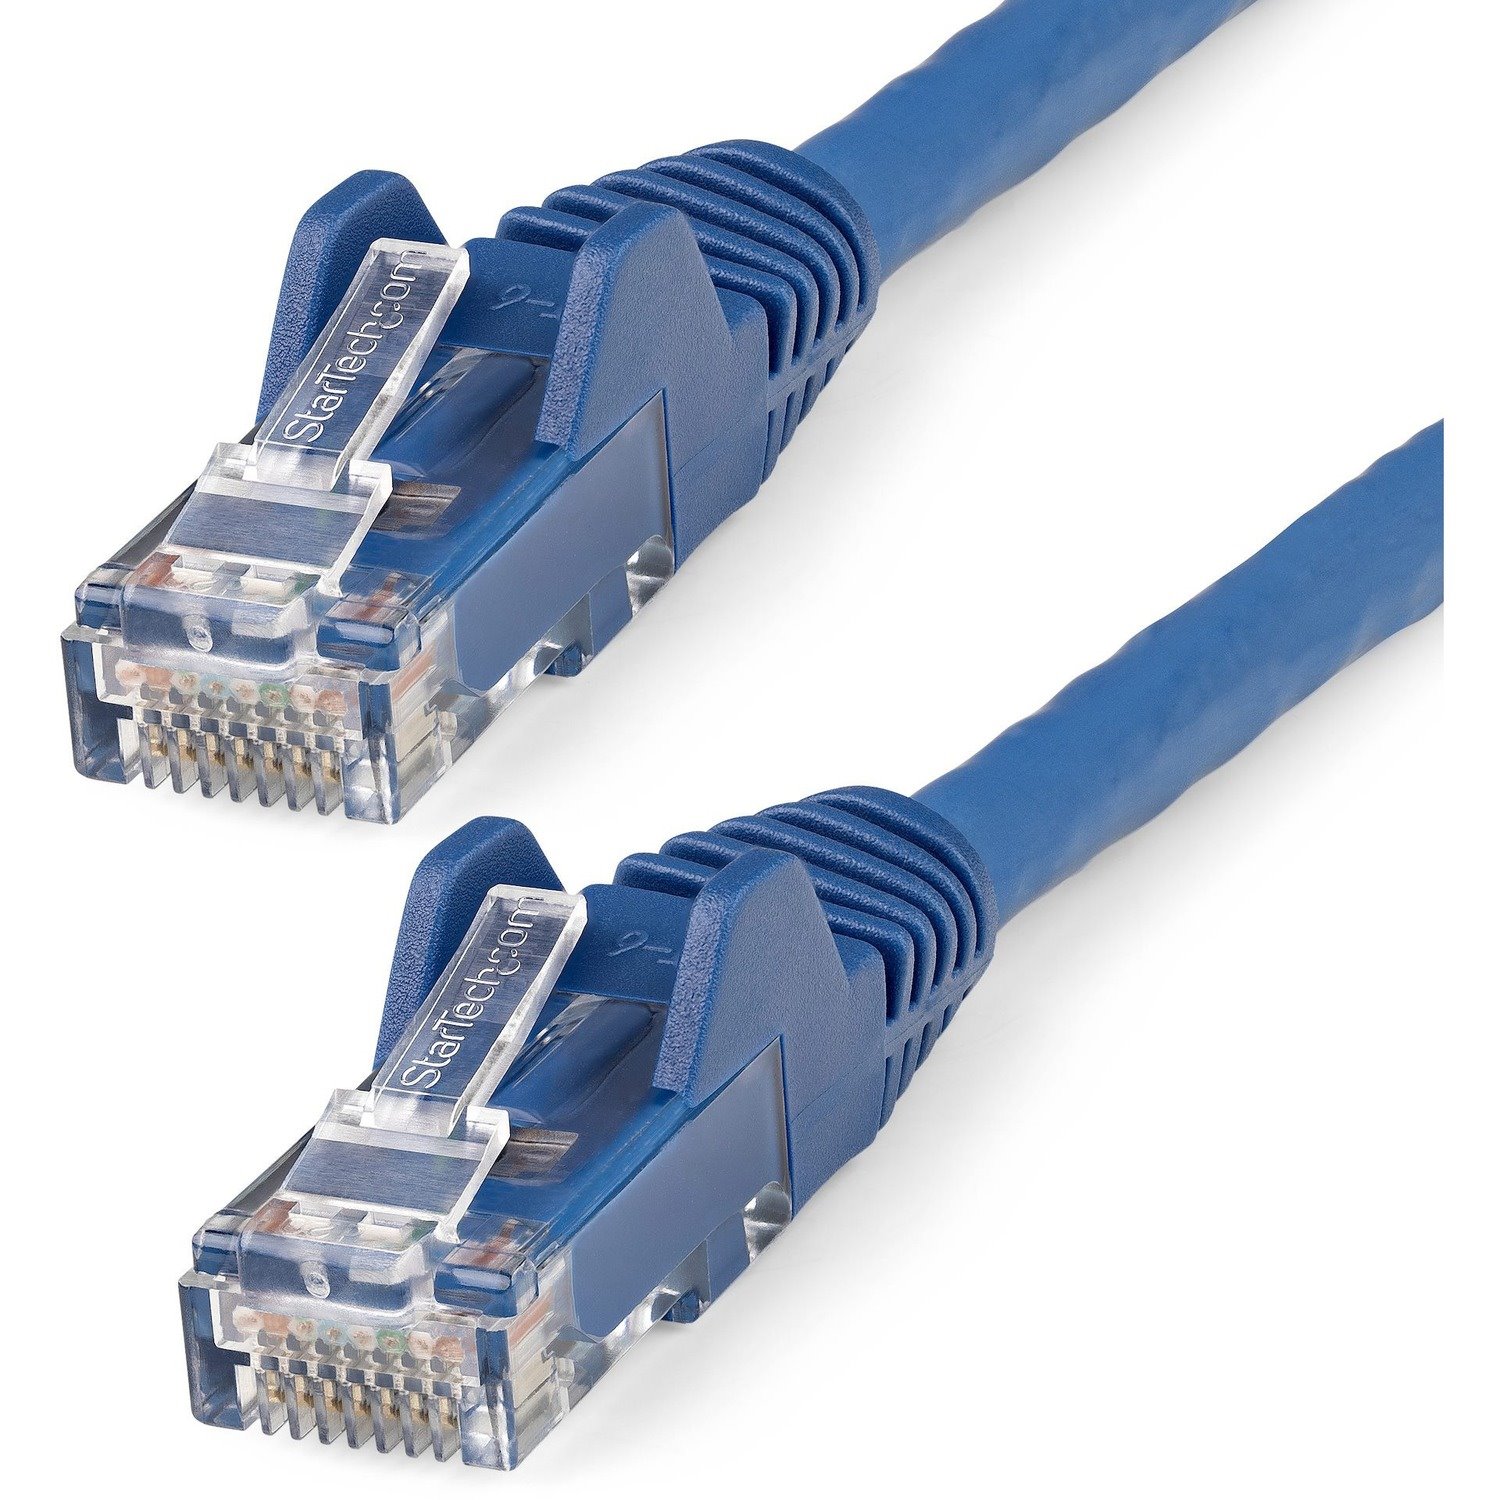 StarTech.com 1 m Category 6 Network Cable for Network Device, Server, Router, NAS Storage Device, VoIP Device, PoE-enabled Device, Notebook, Security Camera